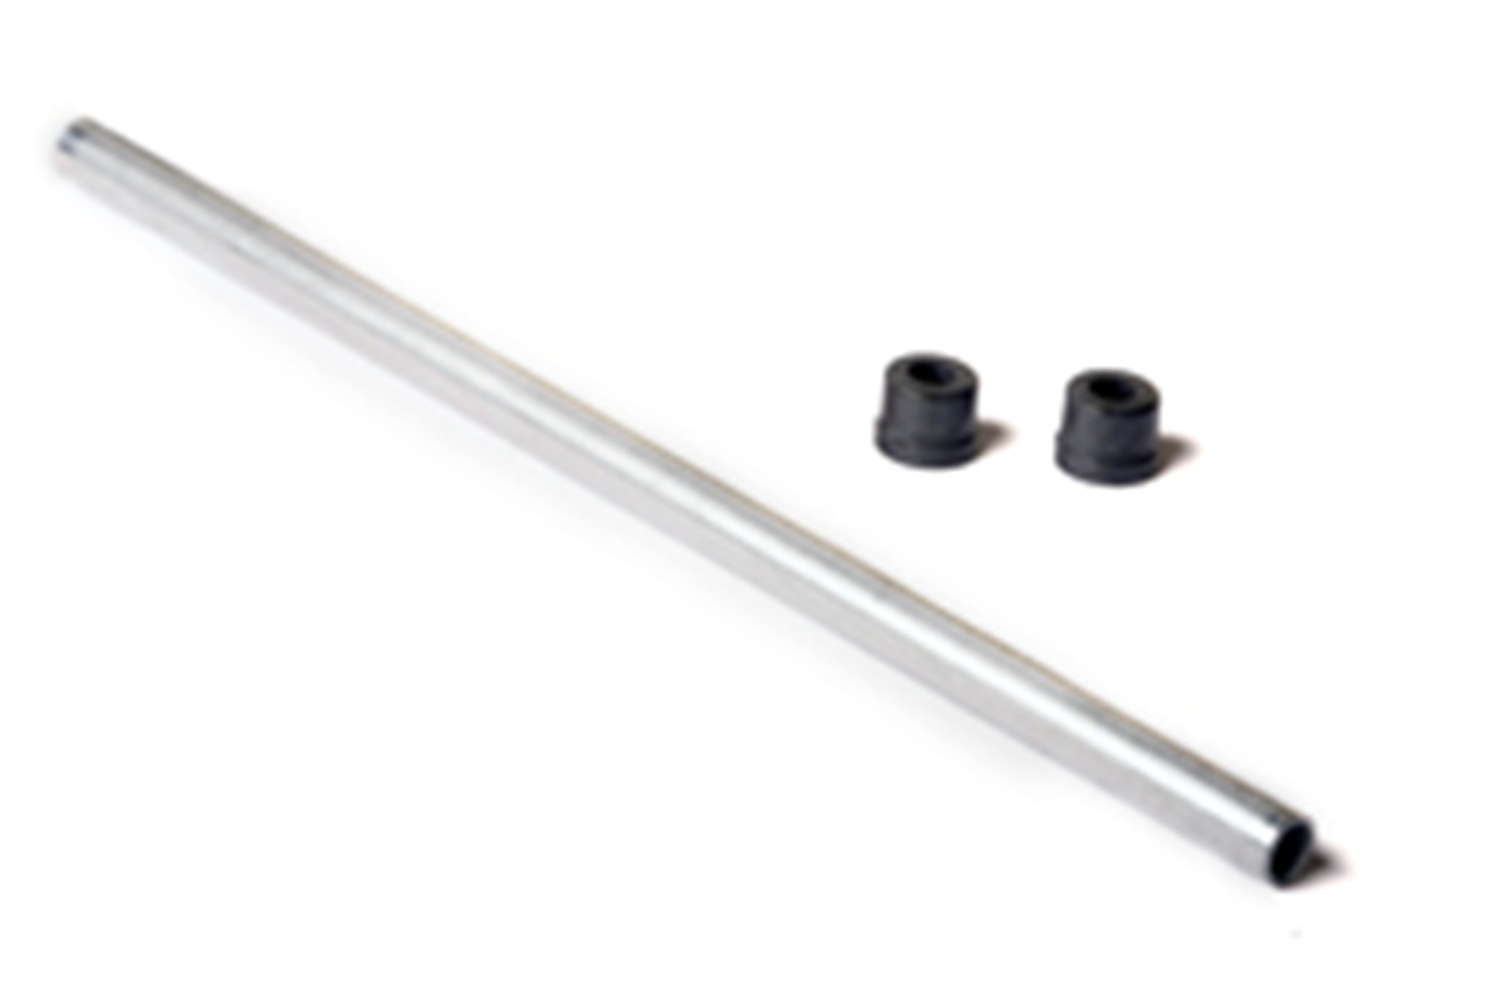 Holley Performance Holley Performance 26-114 Fuel Transfer Tube